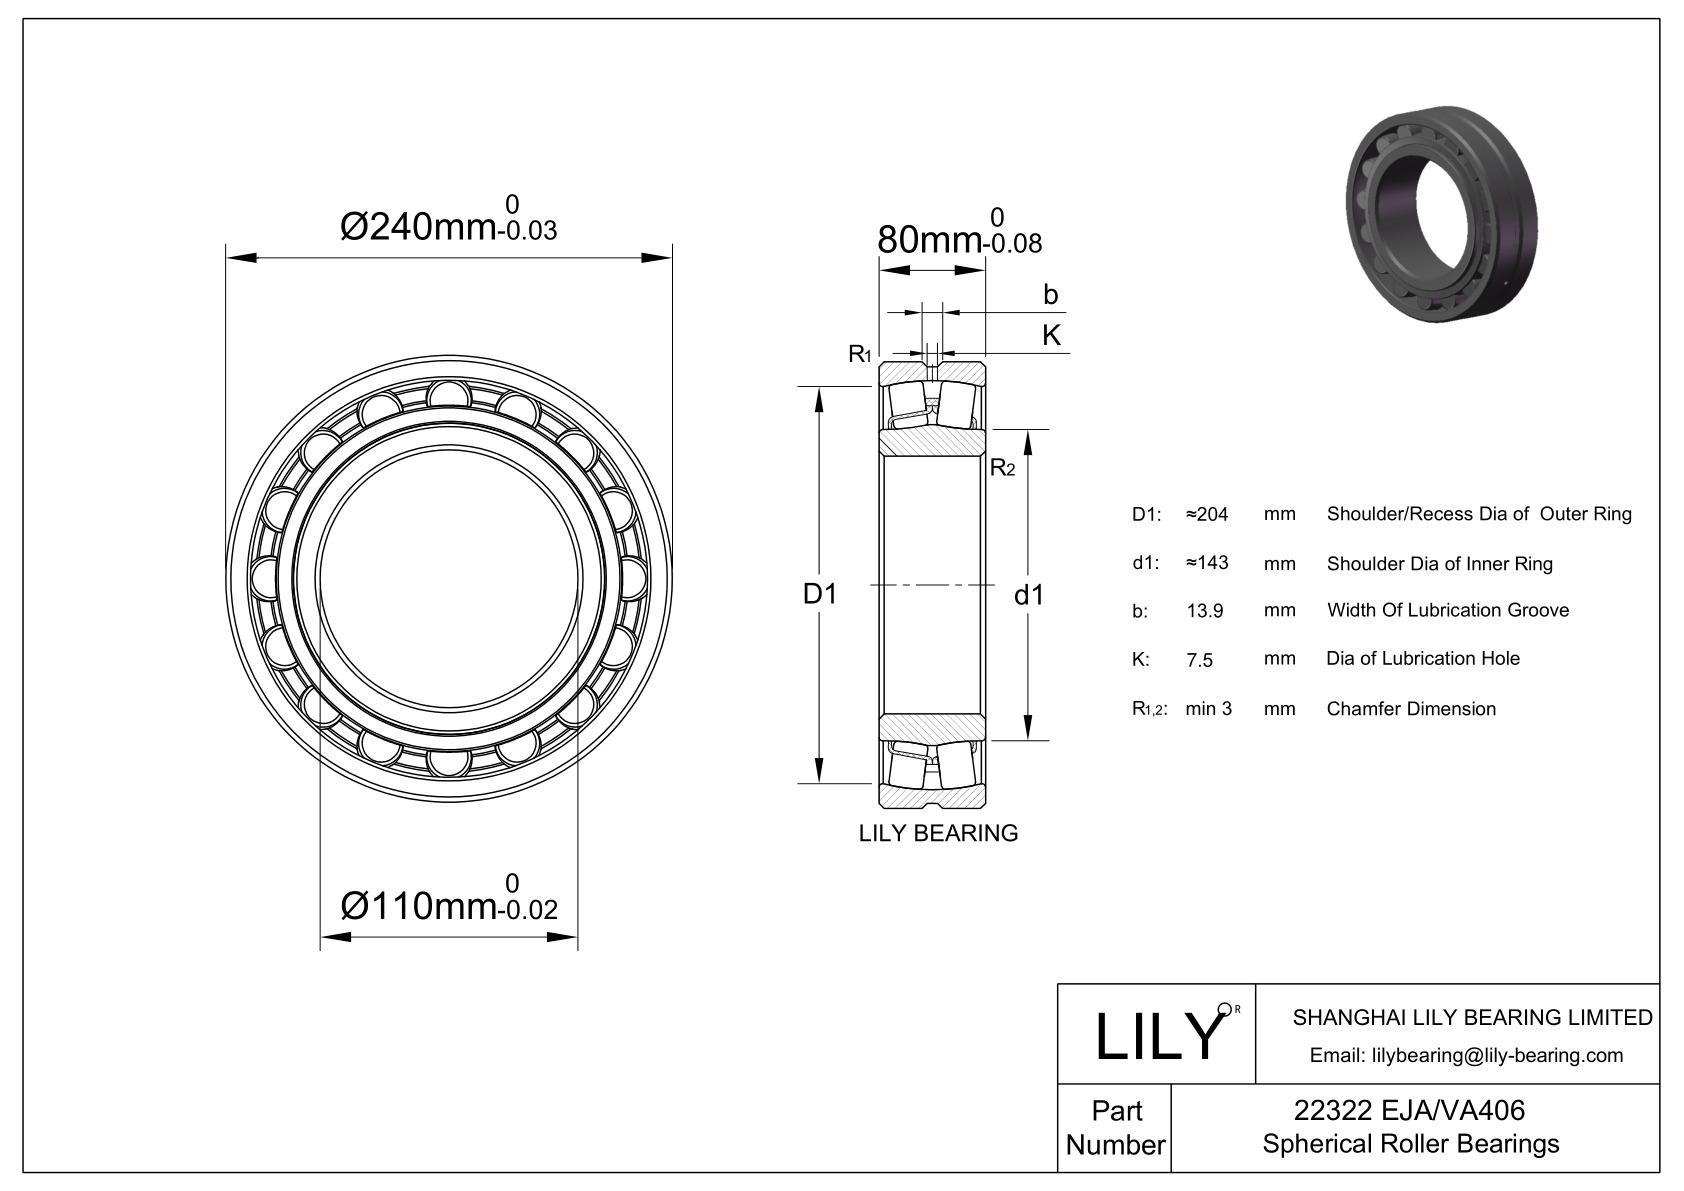 22322 EJA/VA406 Double Row Spherical Roller Bearing cad drawing